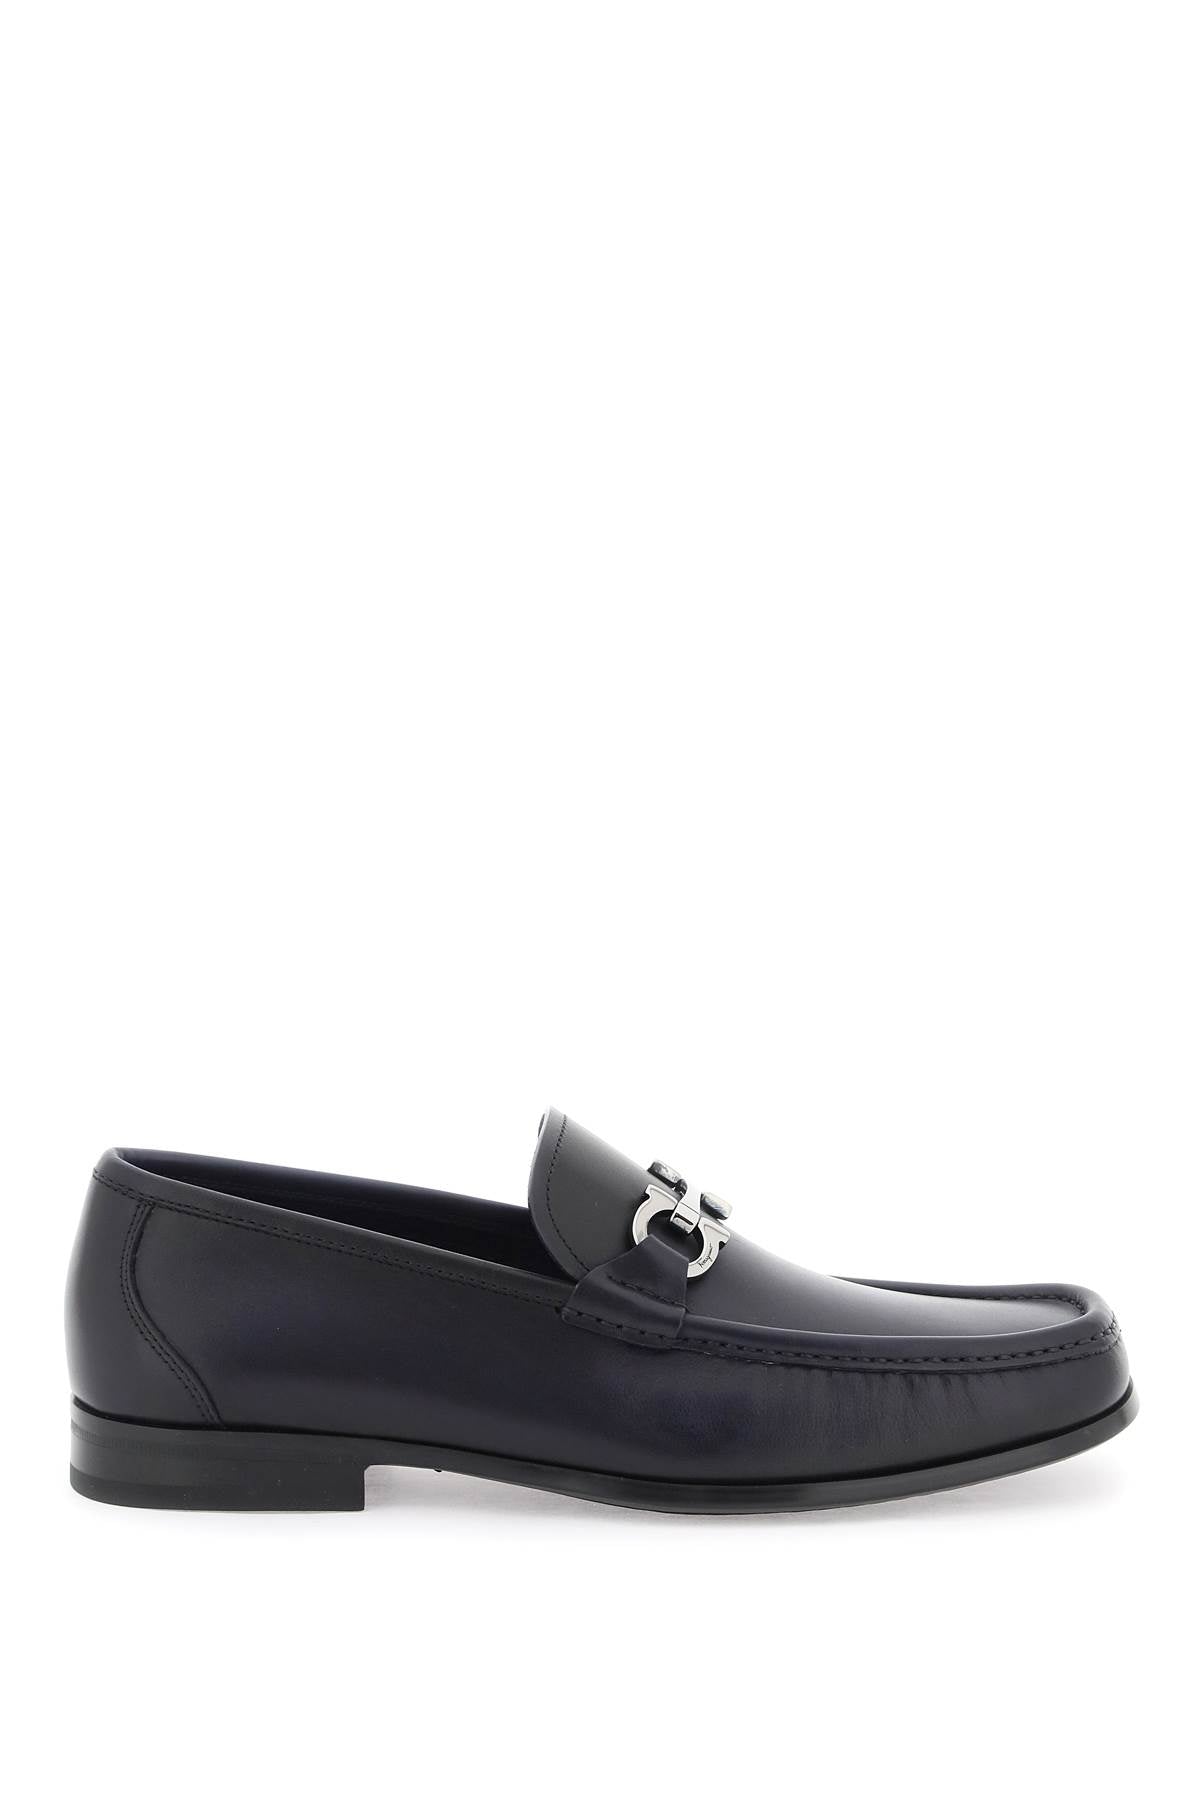 FERRAGAMO Sophisticated Black Leather Loafers for Men with Iconic Gancini Hook